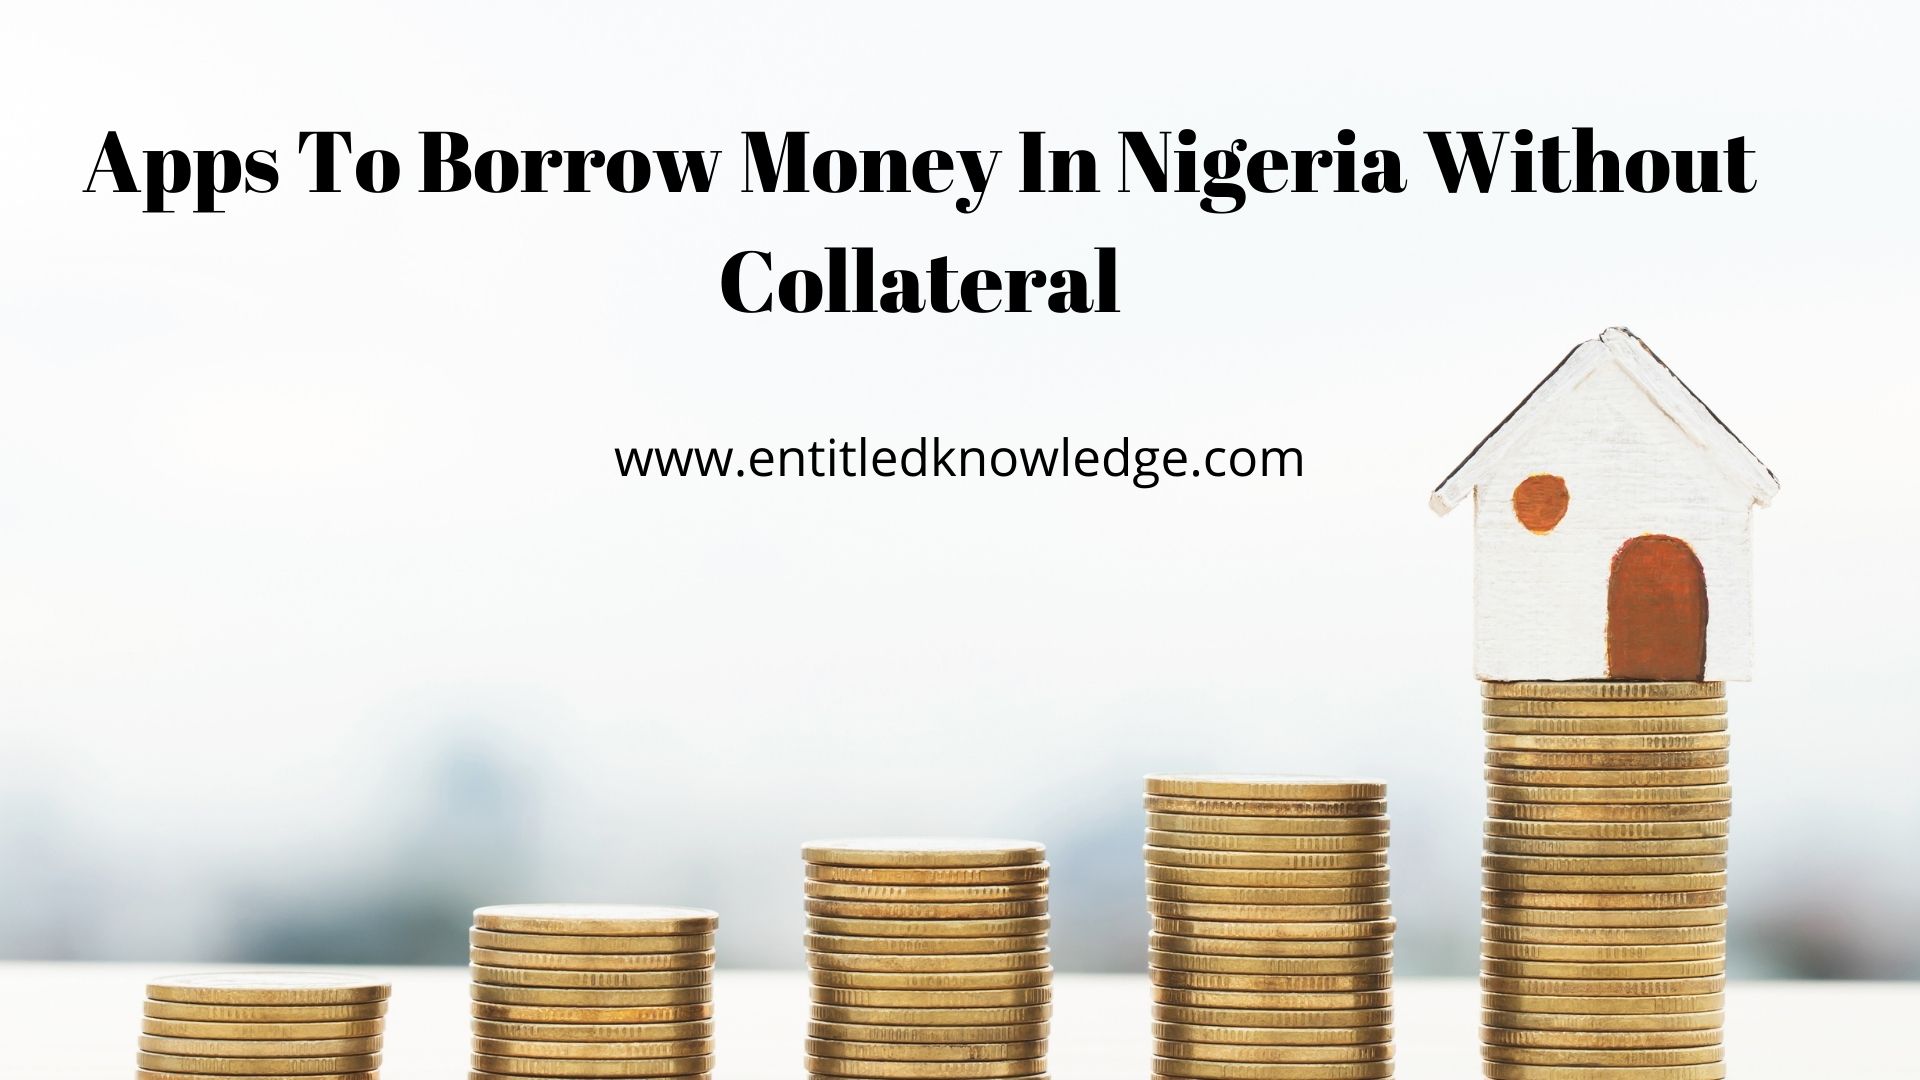 Apps To Borrow Money In Nigeria Without Collateral